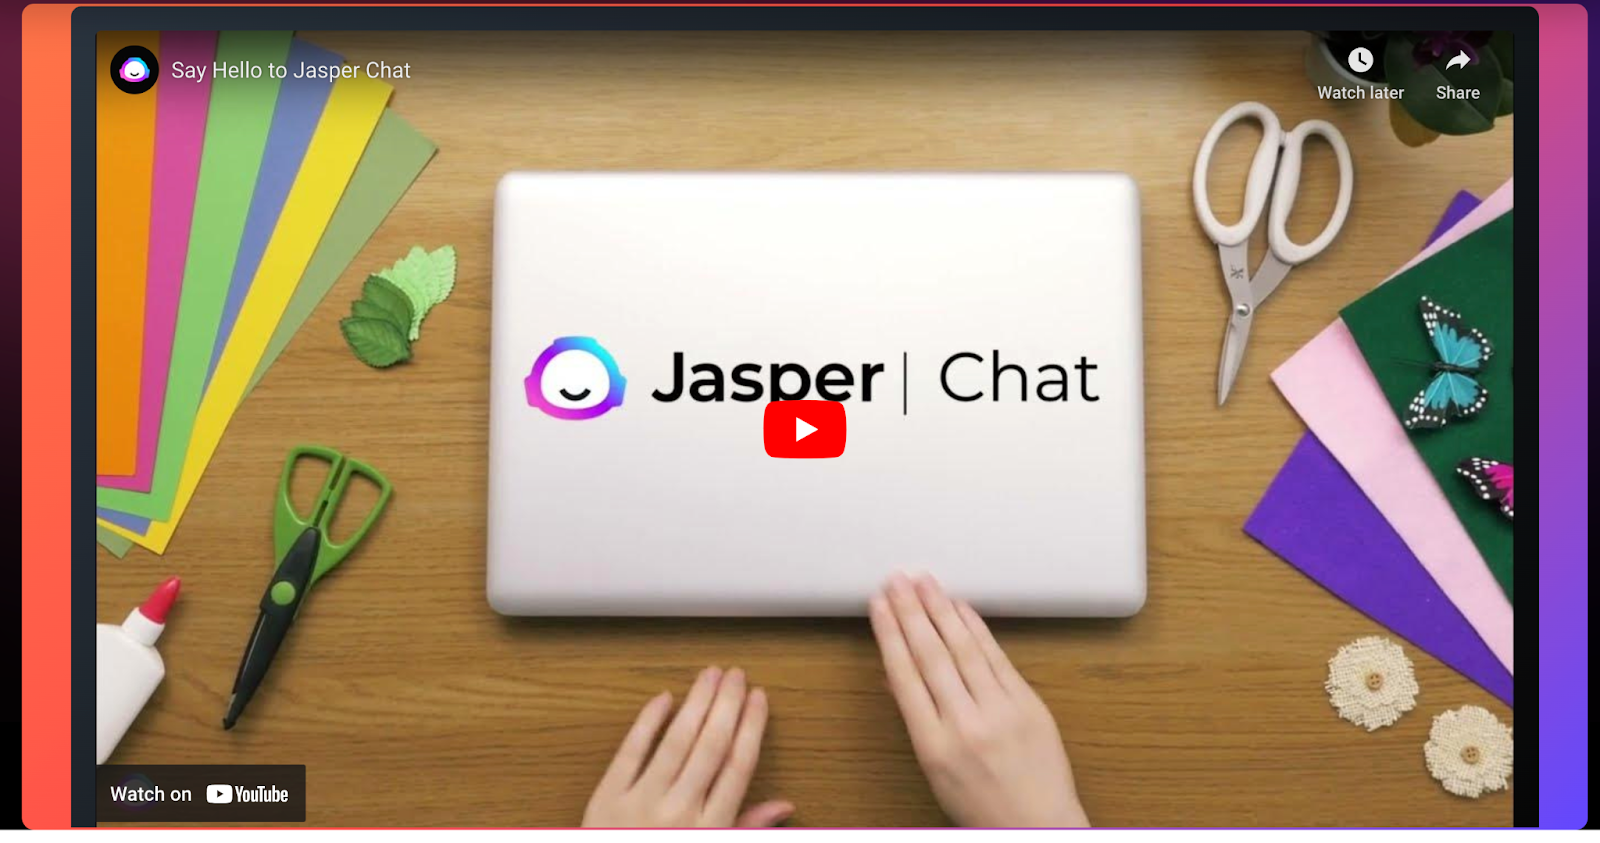 A YouTube video for Jasper Chat is embedded on the product page